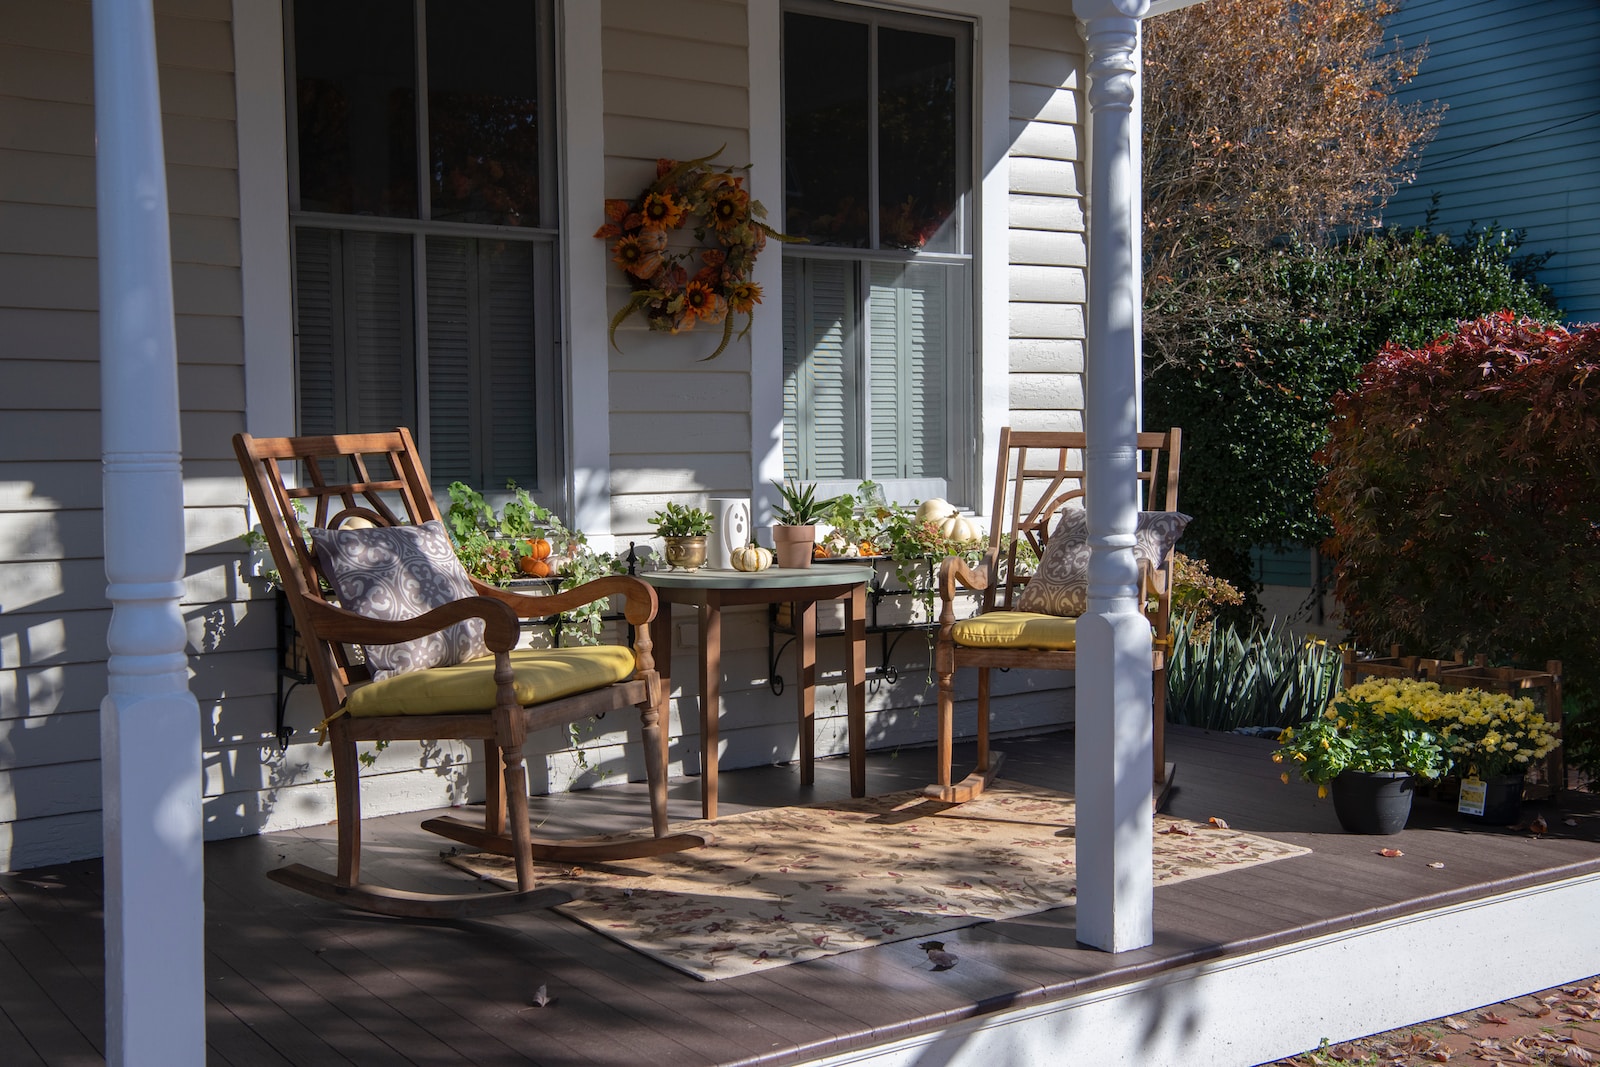 What are the common mistakes to avoid when remodeling porch columns